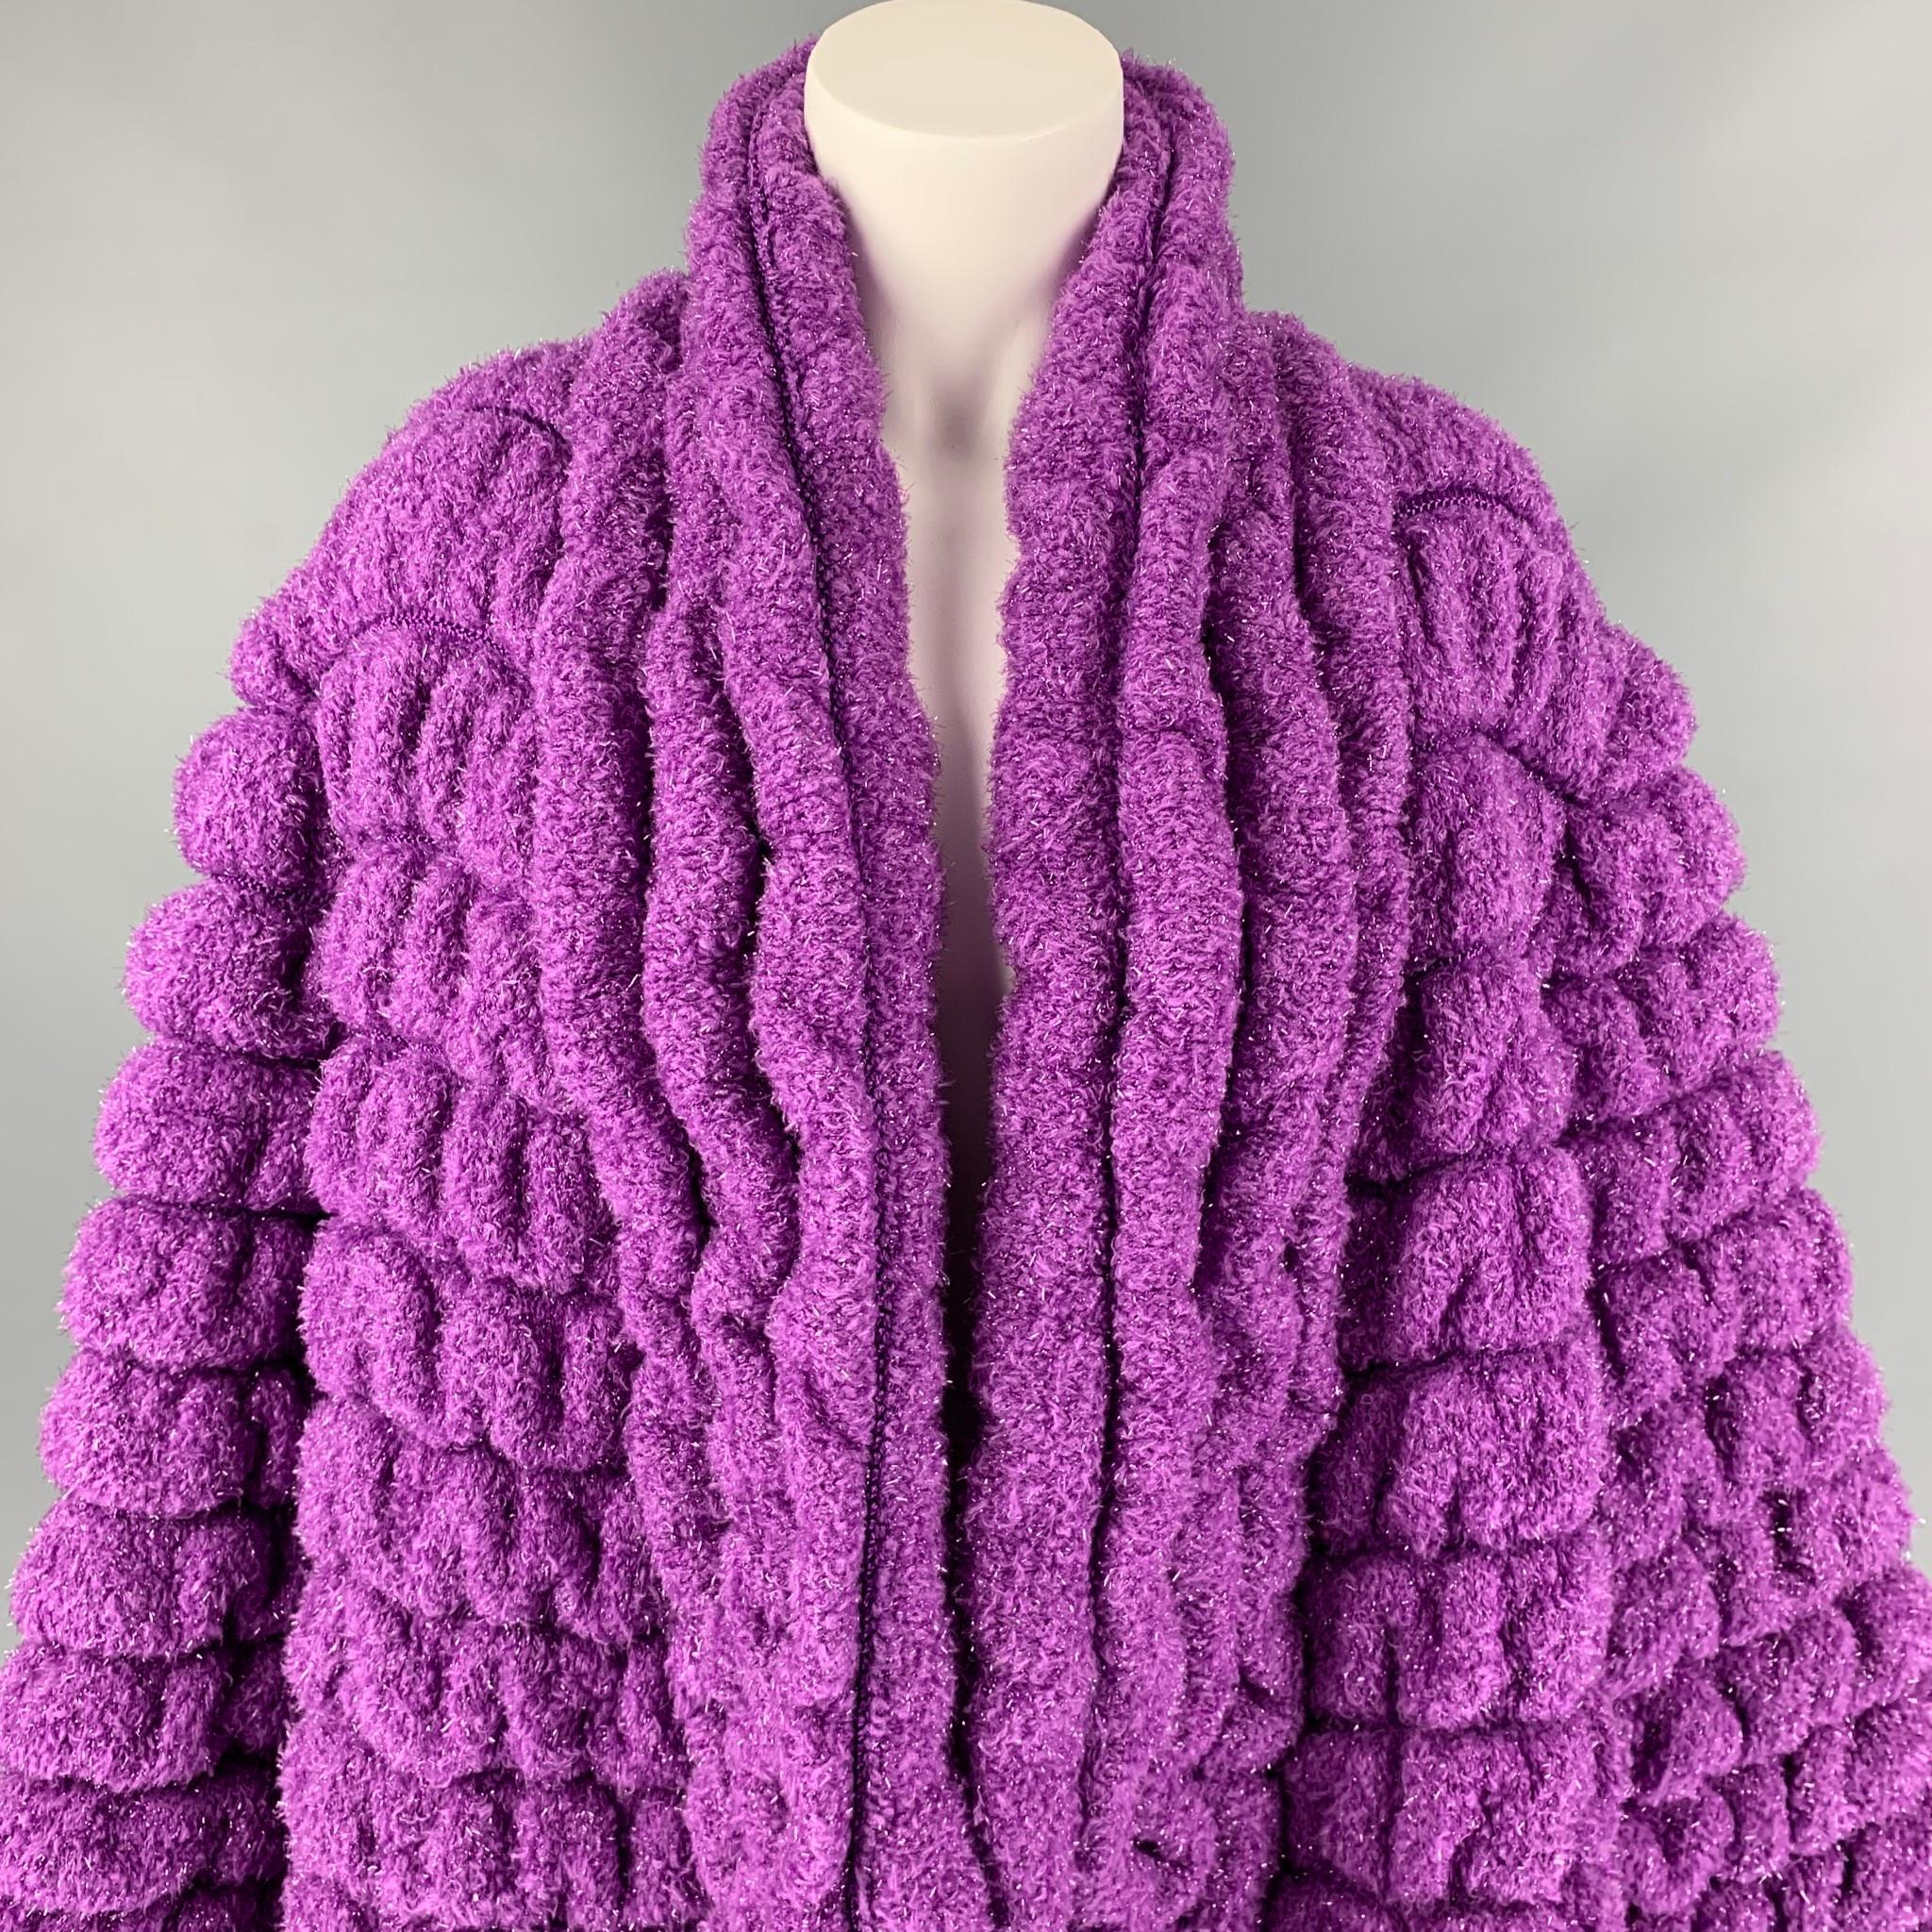 Vintage ANGELA MISSONI coat comes in a purple textured metallic material featuring a oversized fit, shawl collar, and a open front. 

Very Good Pre-Owned Condition. Fabric tag removed.
Marked: Size tag removed.

Measurements:

Shoulder: 18 in.
Bust: